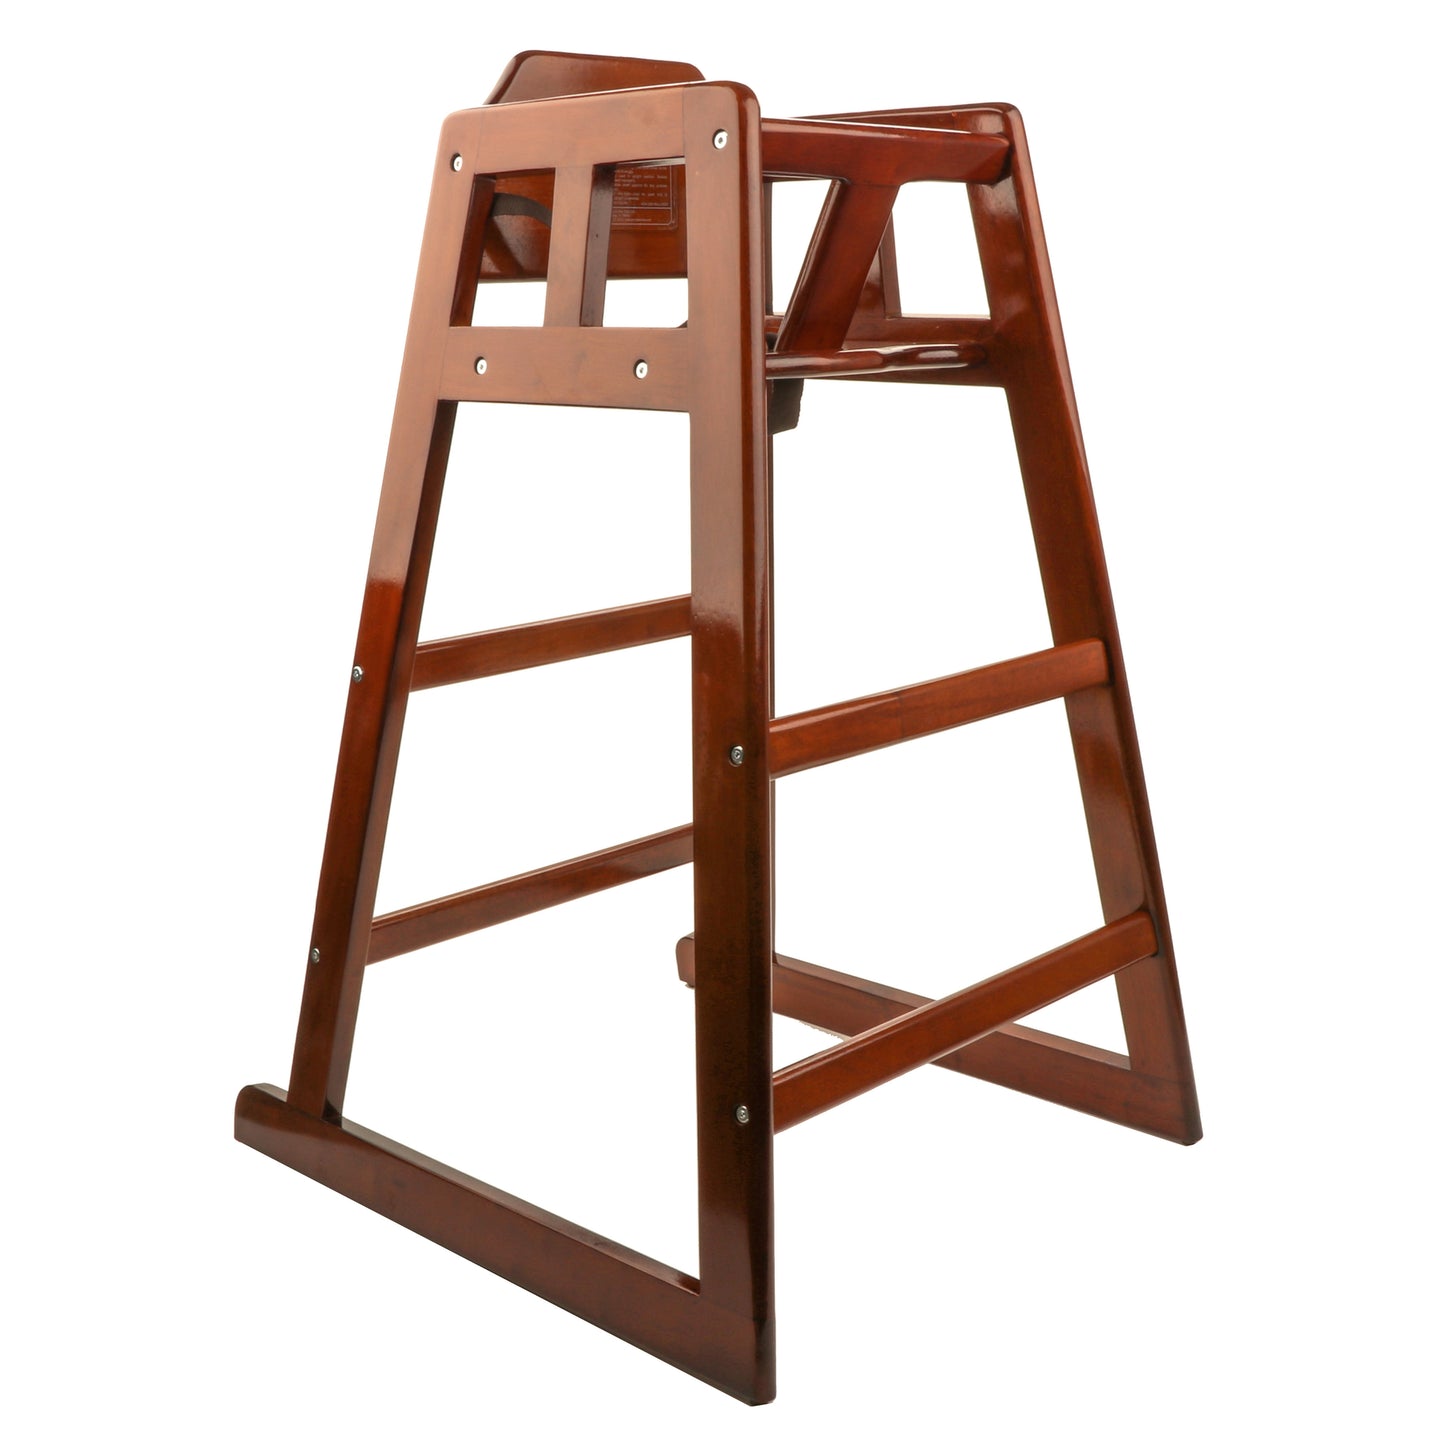 36" Tall, Walnut, Hardwood, Modified High Chair, 22" L x 25" W, Assembly Required, G.E.T. High Chairs